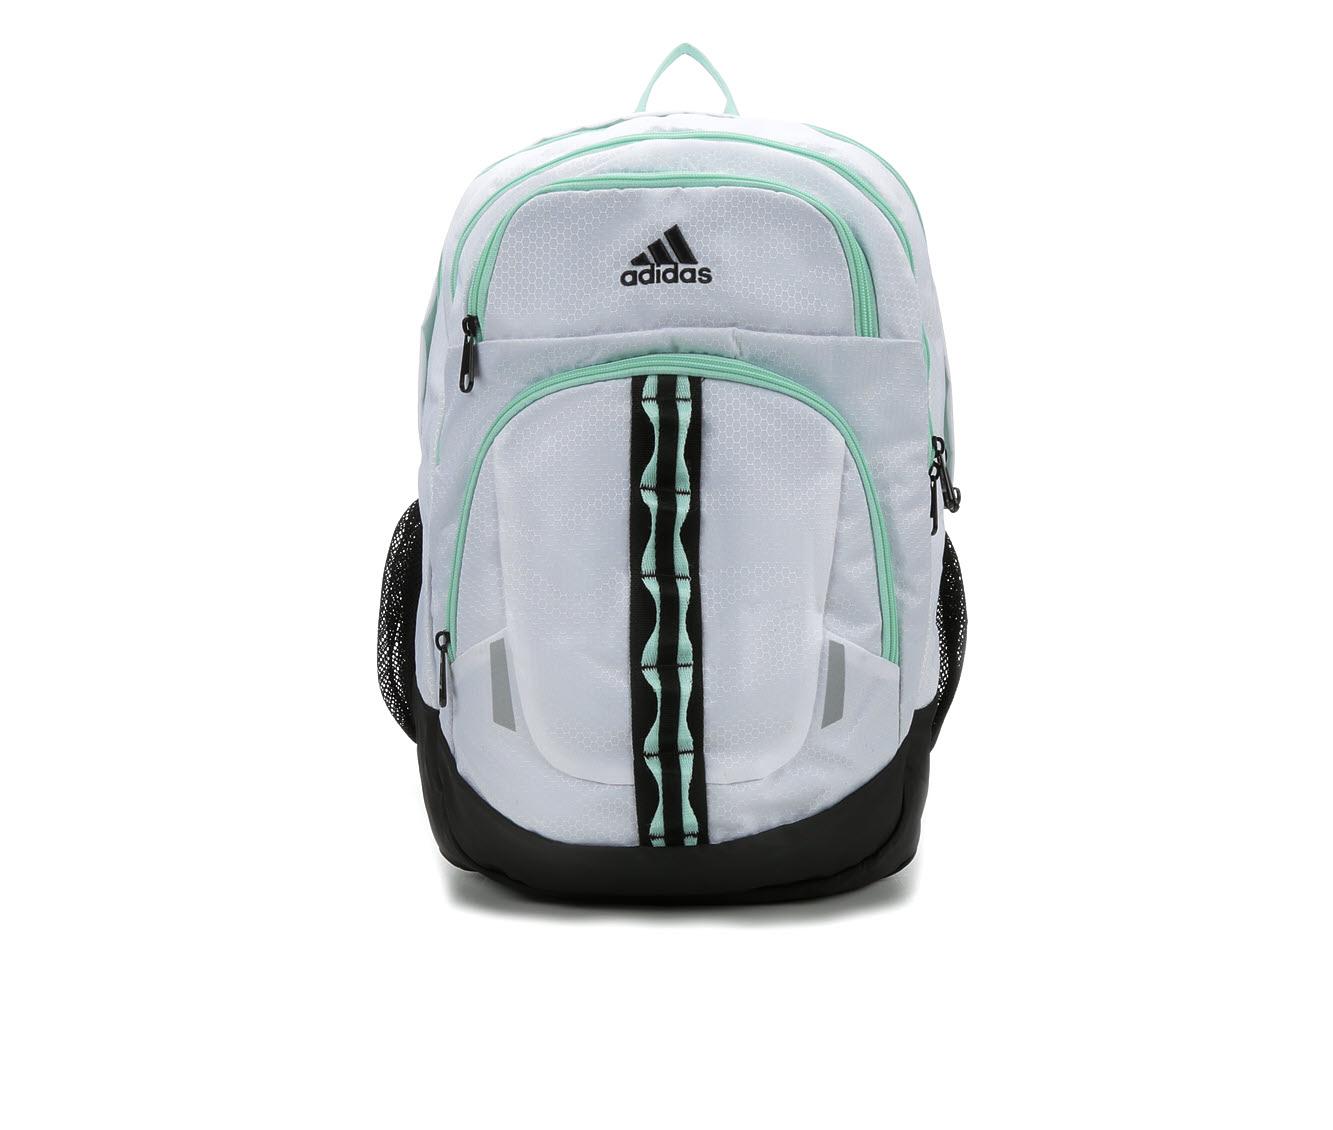 adidas Synthetic Prime V Backpack in 